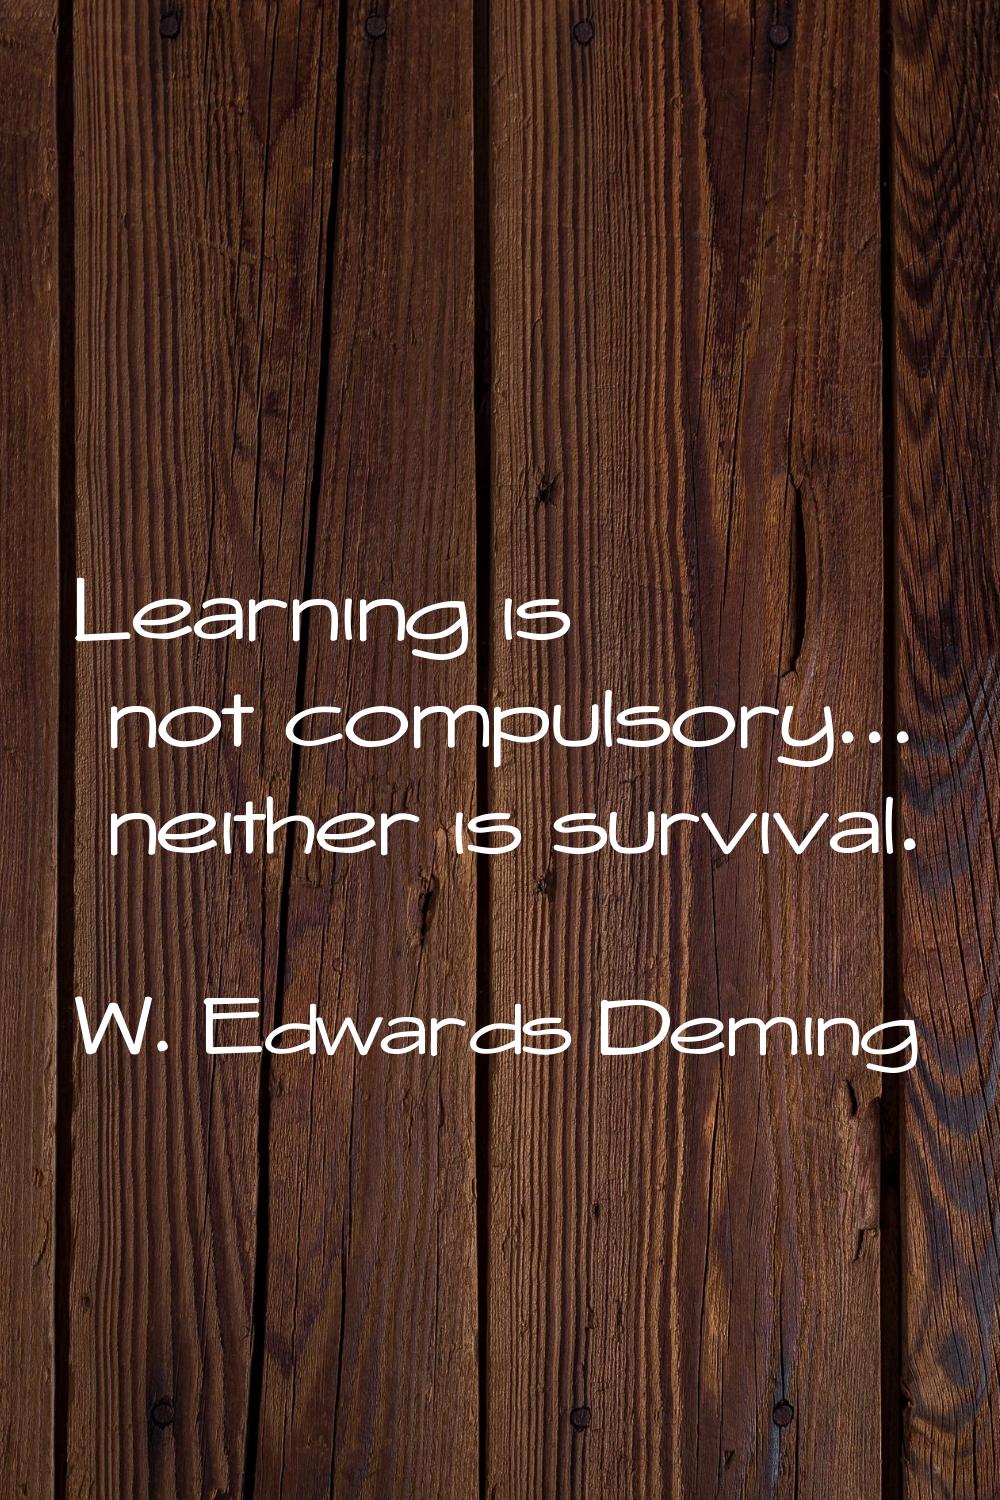 Learning is not compulsory... neither is survival.